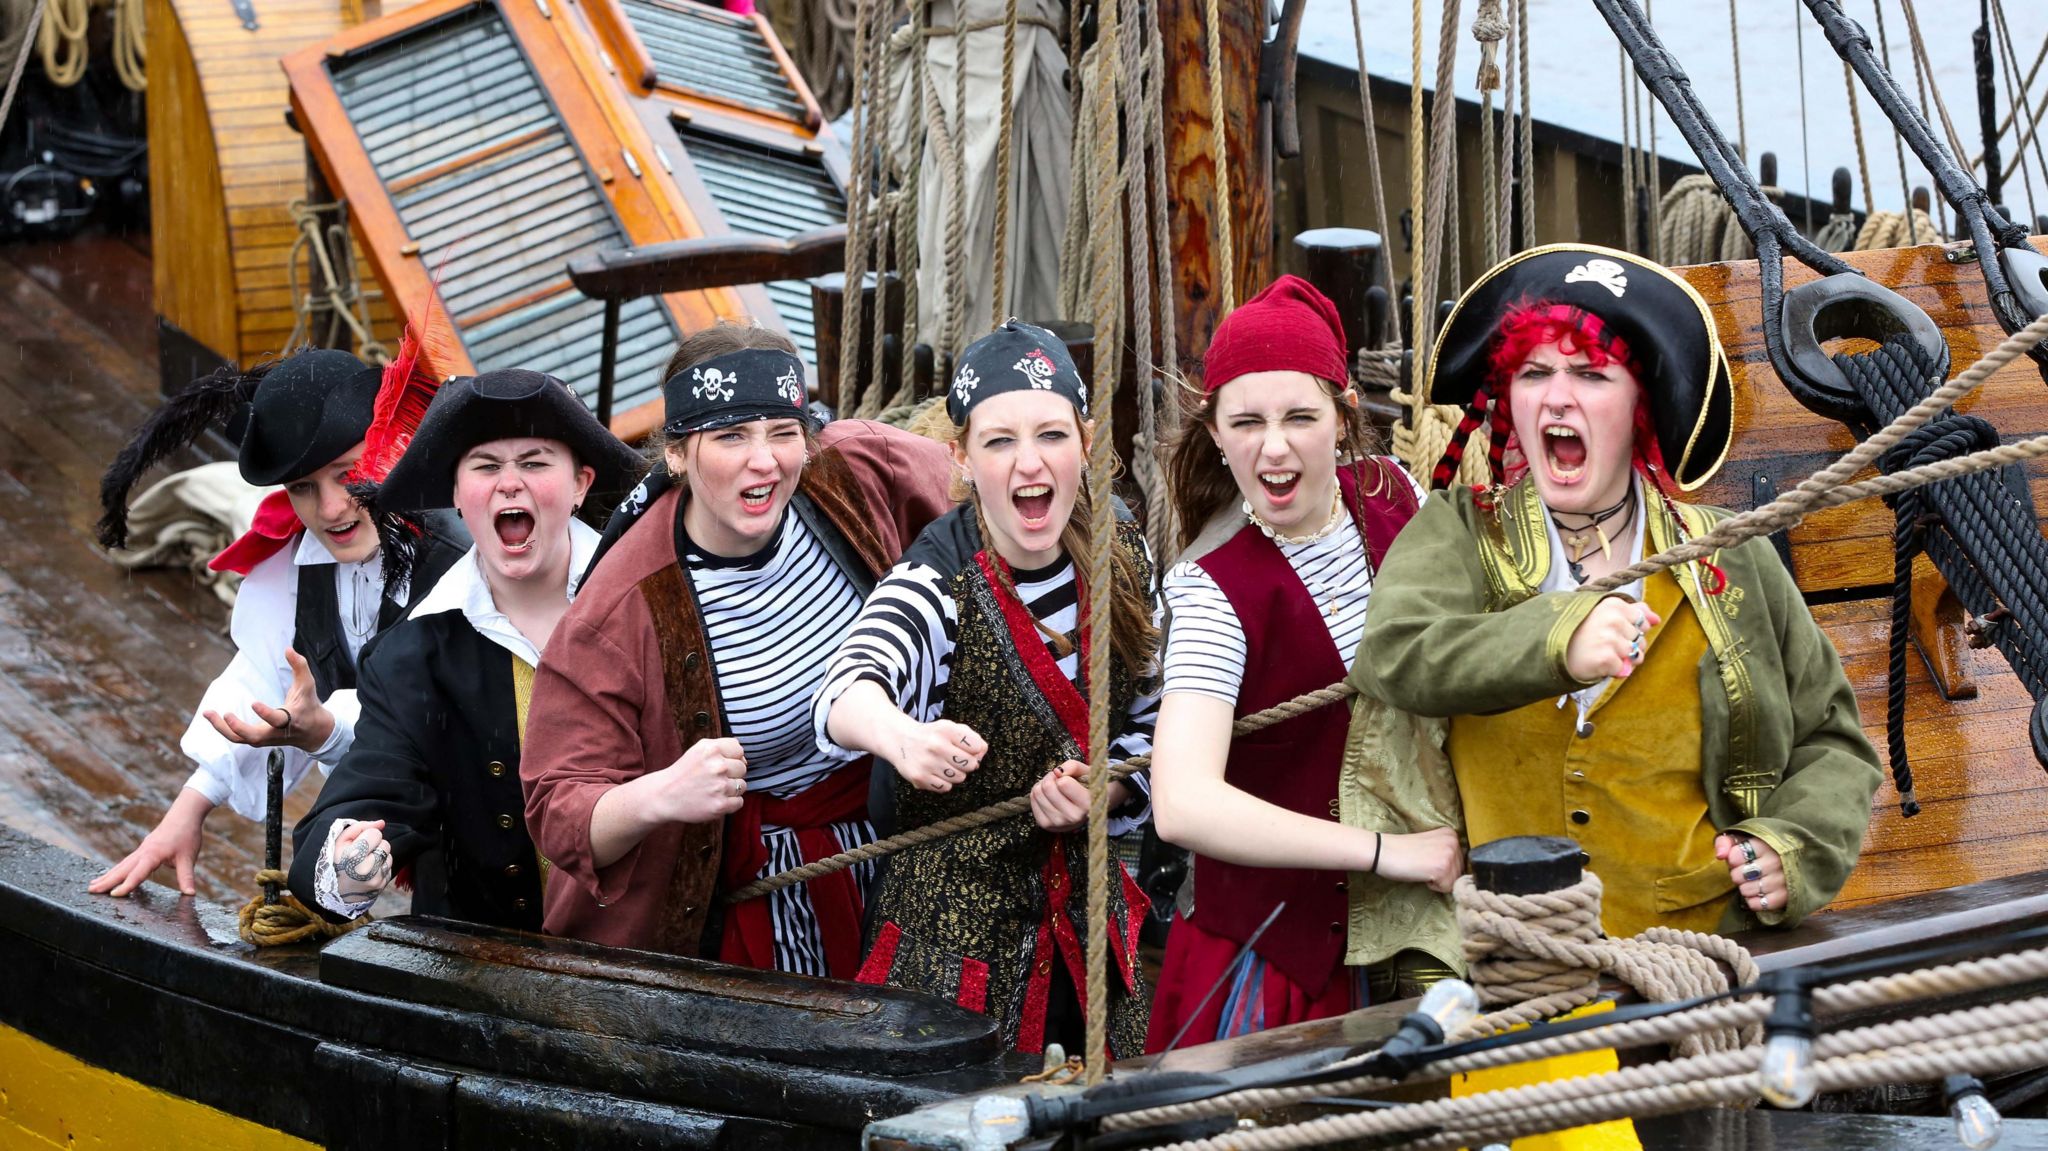 Six people dressed as pirates stand on the side of a pirate ship